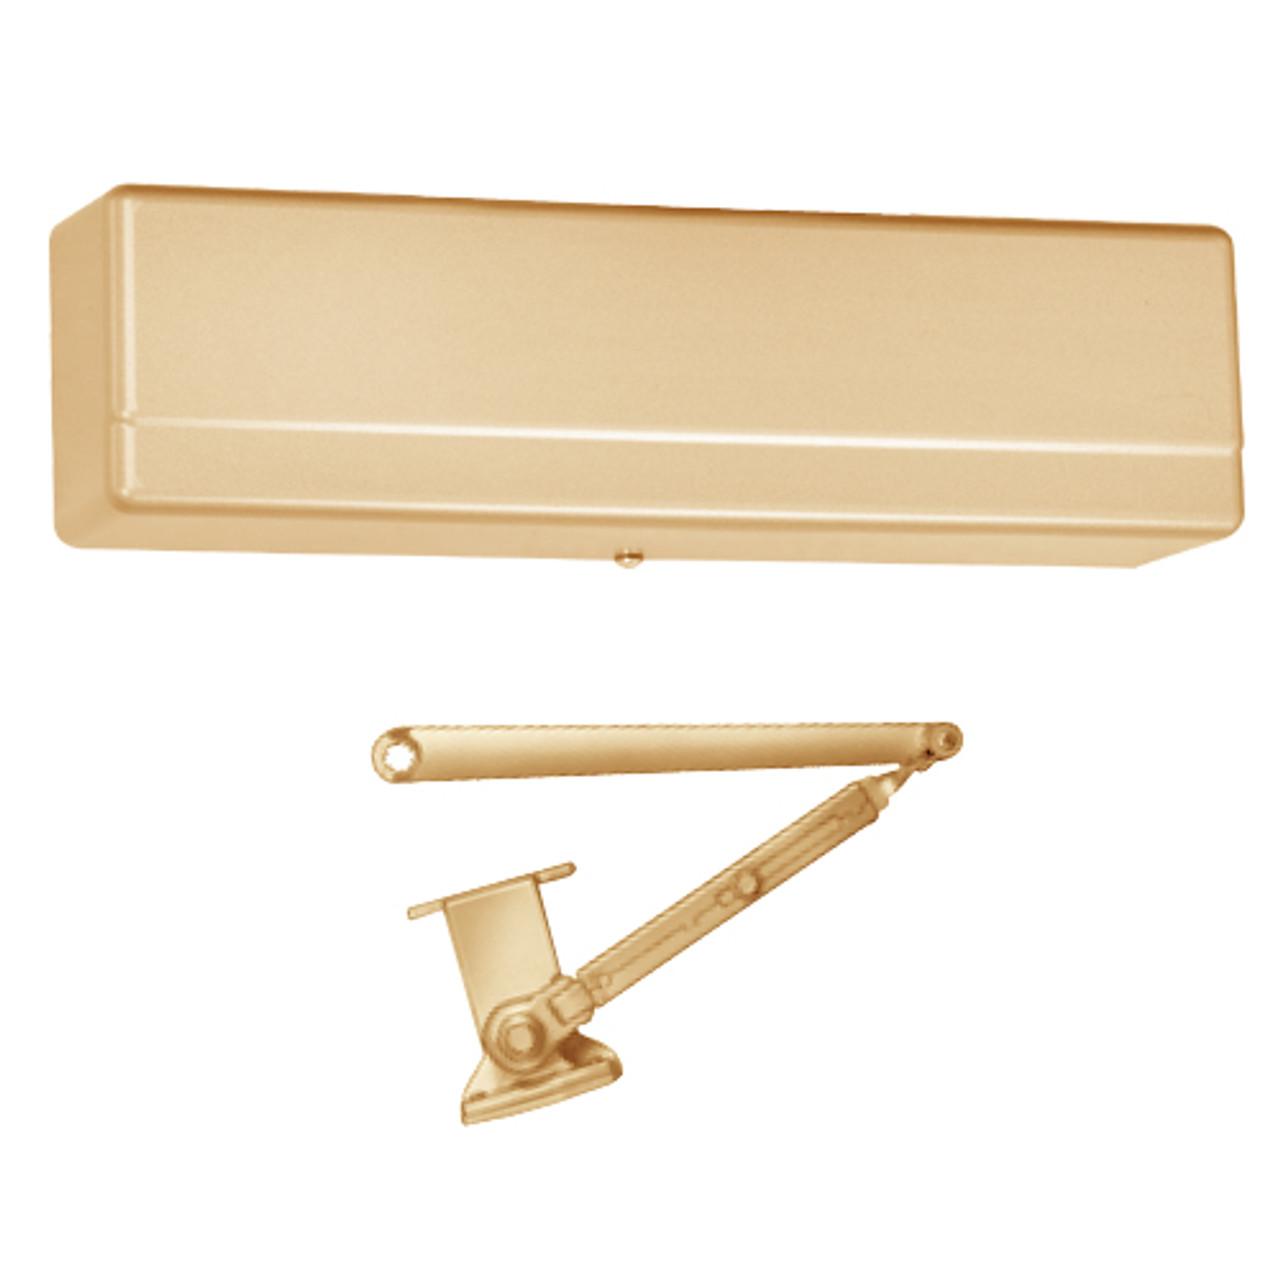 1431-PH4-EP Sargent 1431 Series Powerglide Door Closer with PH4 Flush Frame Friction Hold Open Arm in Satin Bronze Powder Coat